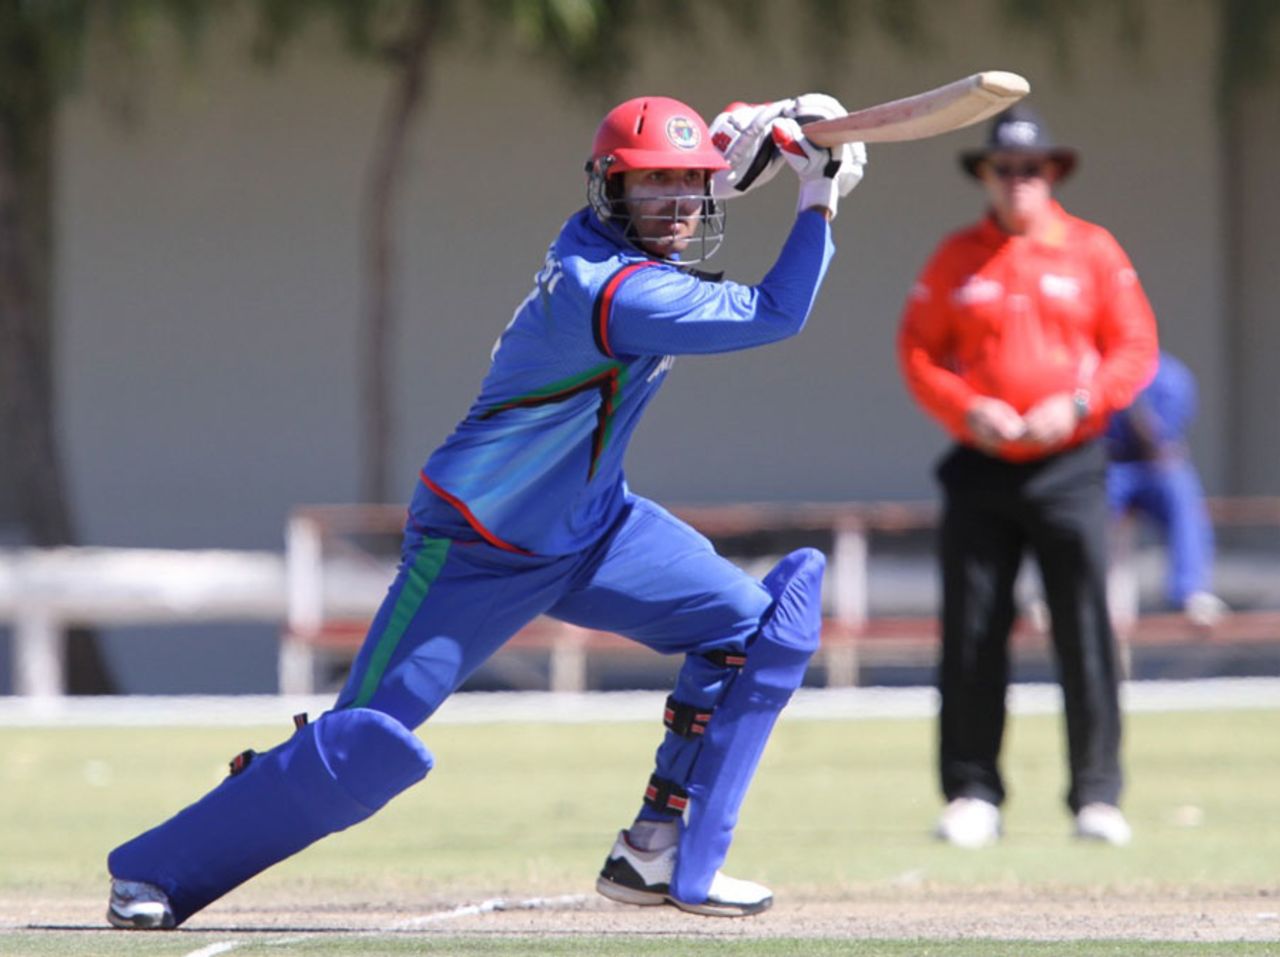 Afghanistan captain Mohammad Nabi scored an unbeaten 81, Namibia v Afghanistan, WCL Championship, Windhoek, August 9, 2013